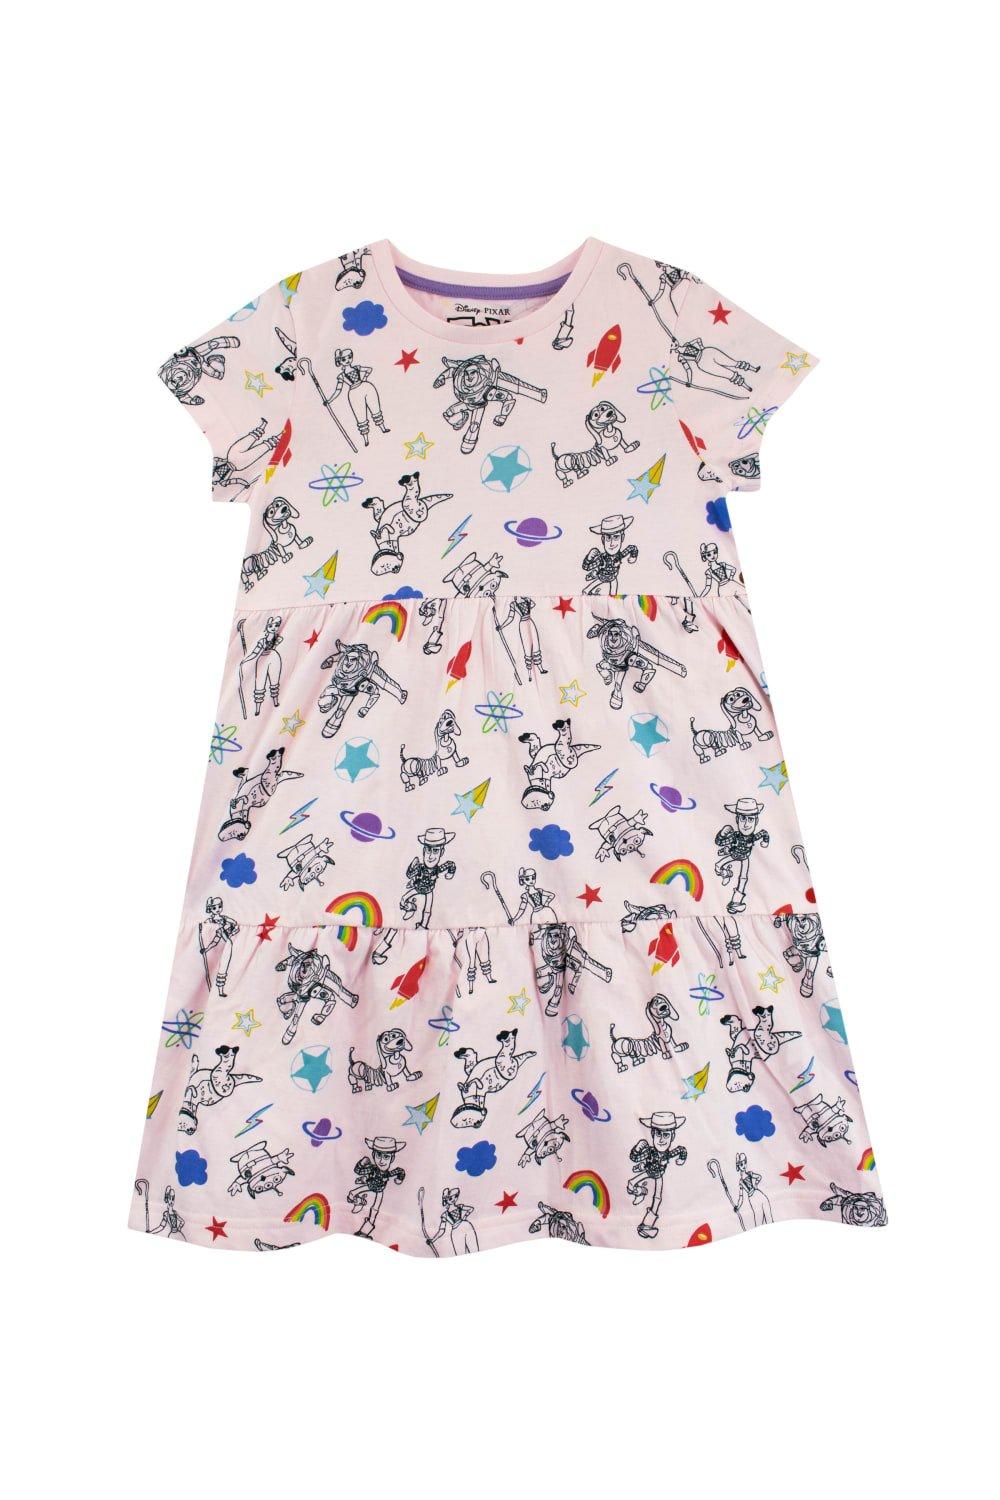 Toy Story Woody Buzz Bo Peep And Friends Print Dress